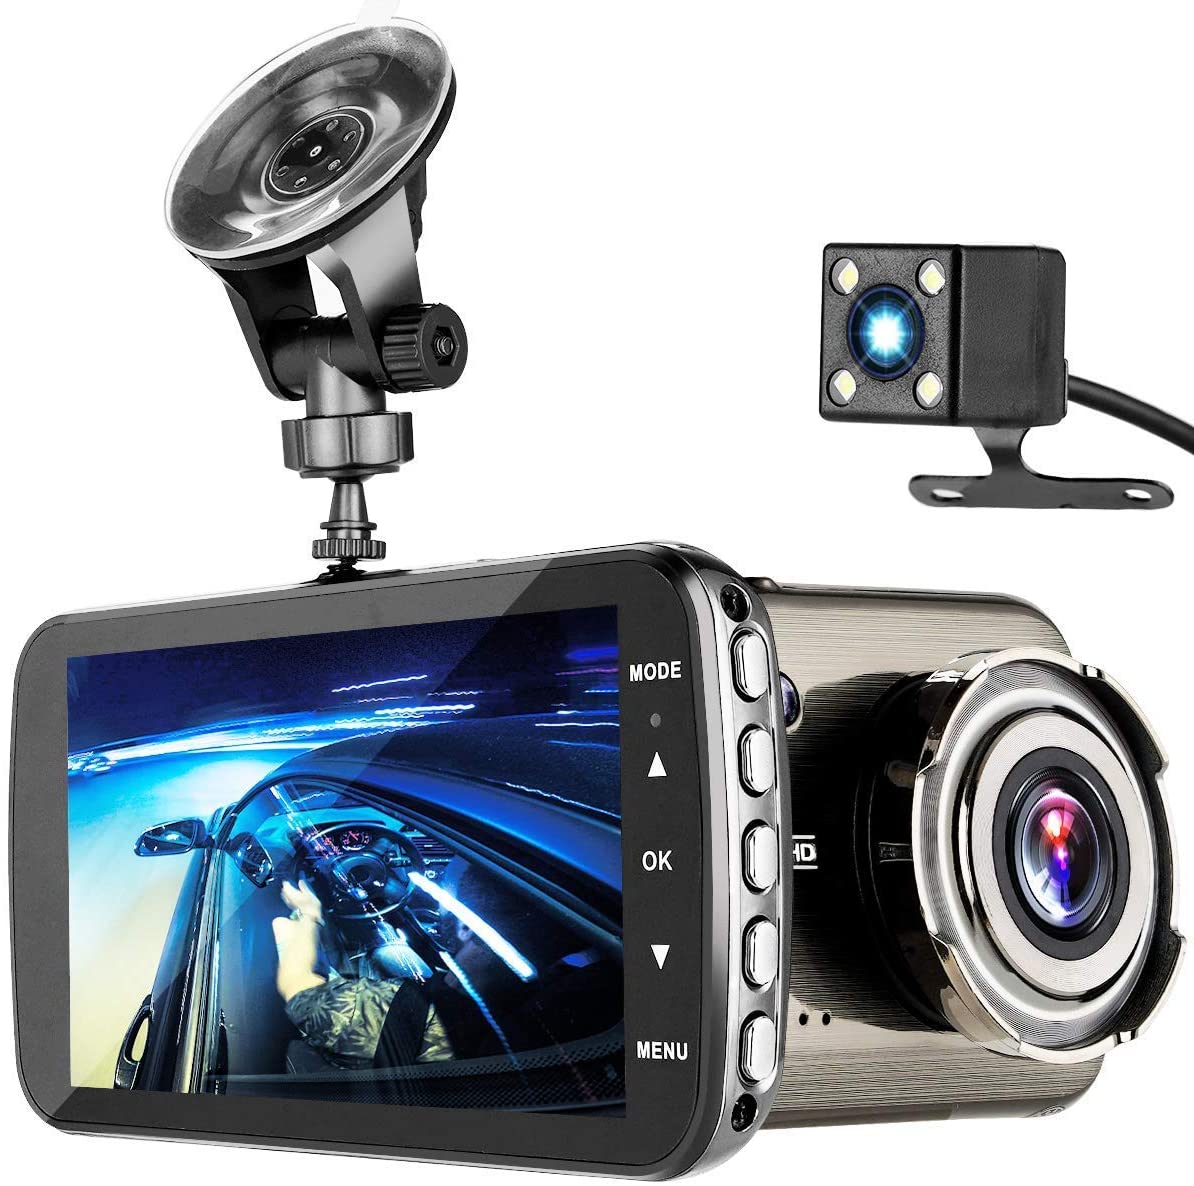 Dash Cam, 1080P 4K HD WiFi Car Dash Cam with Fingerprint Touch, Dash Camera for Cars with Night Vision, WDR, Loop Recording, G-Sensor, Motion Detection, 24H Parking Monitor